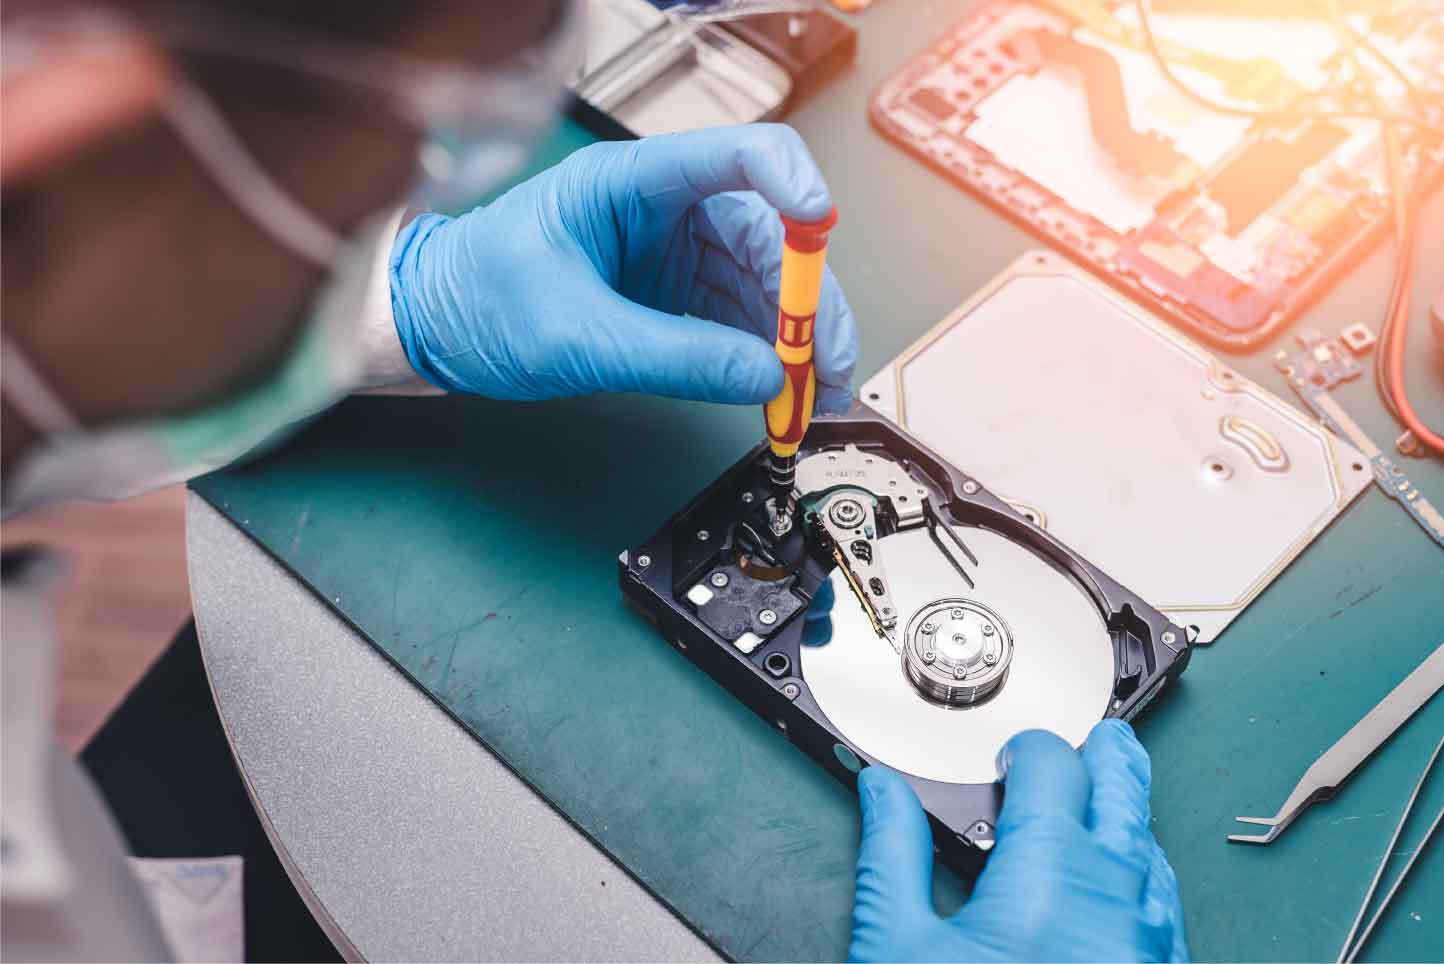 Data Recovery Services From Damaged Or Crashed Hard Drive